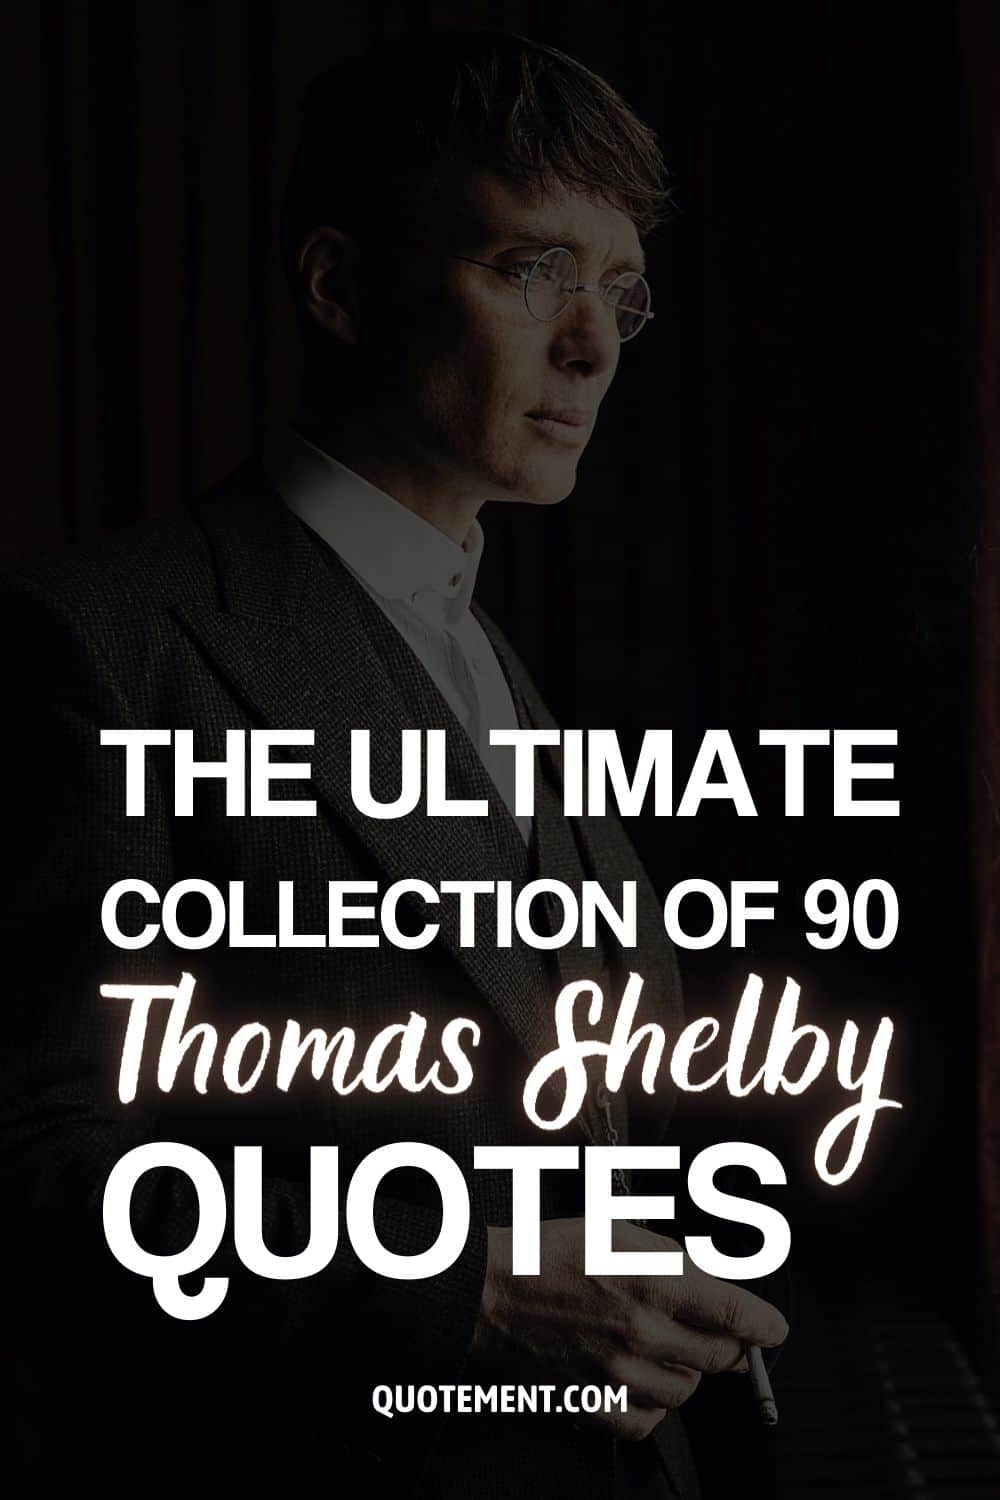 The Ultimate Collection Of 90 Thomas Shelby Quotes
